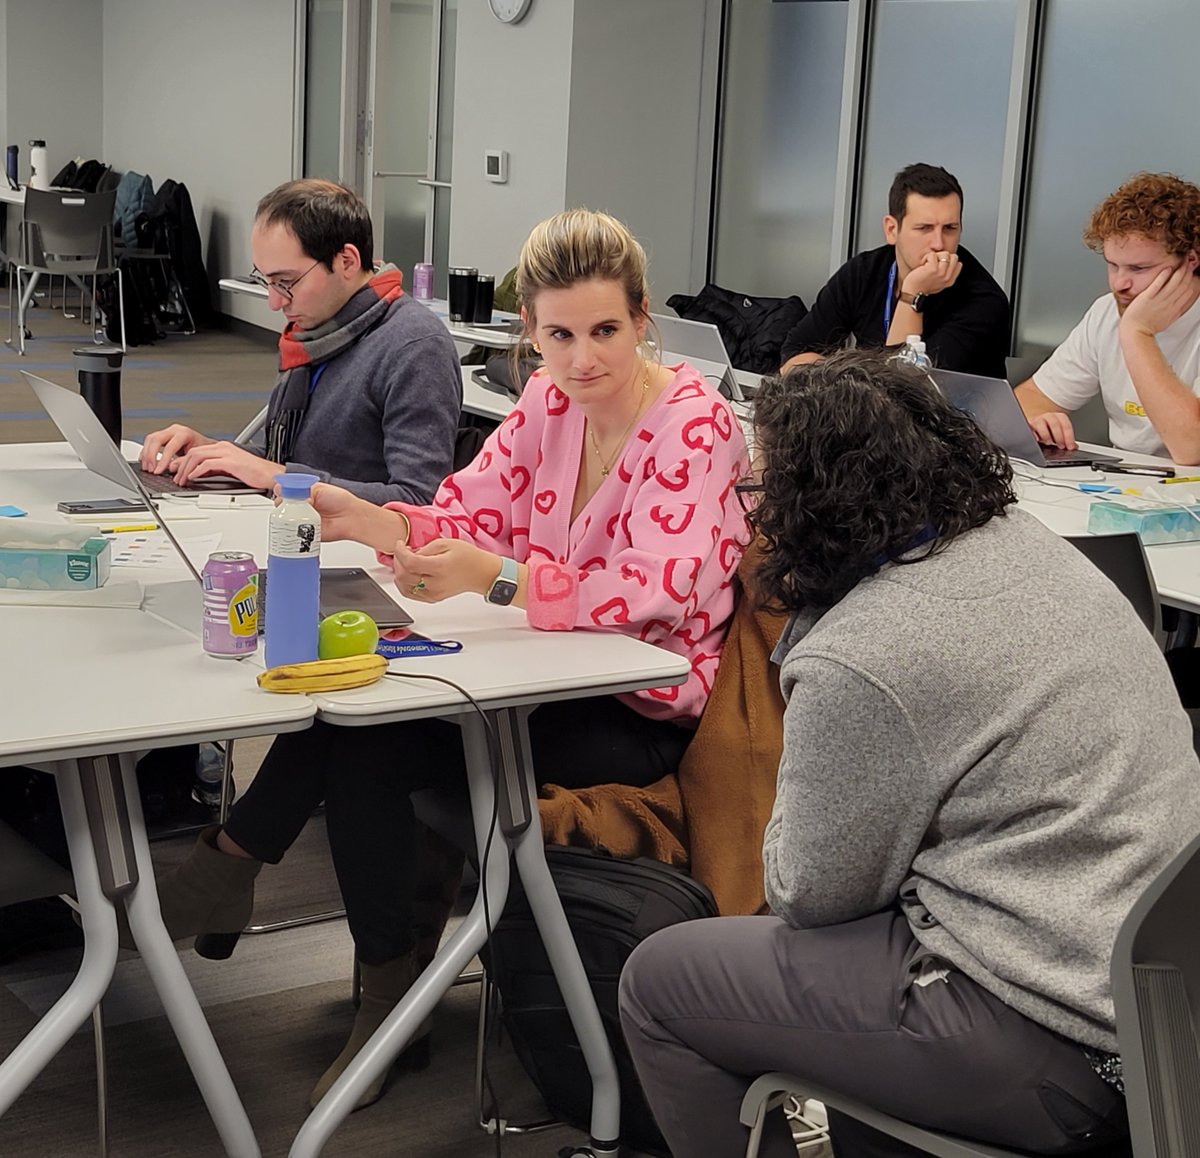 This week, 19 #PediatricCancer researchers joined us in Philadelphia to learn about cell-type identification with scRNA-seq data, integrating scRNA-seq experiments, differential expression analyses, and working with CITE-seq data at our Advanced #SingleCell #RNASeq Workshop!